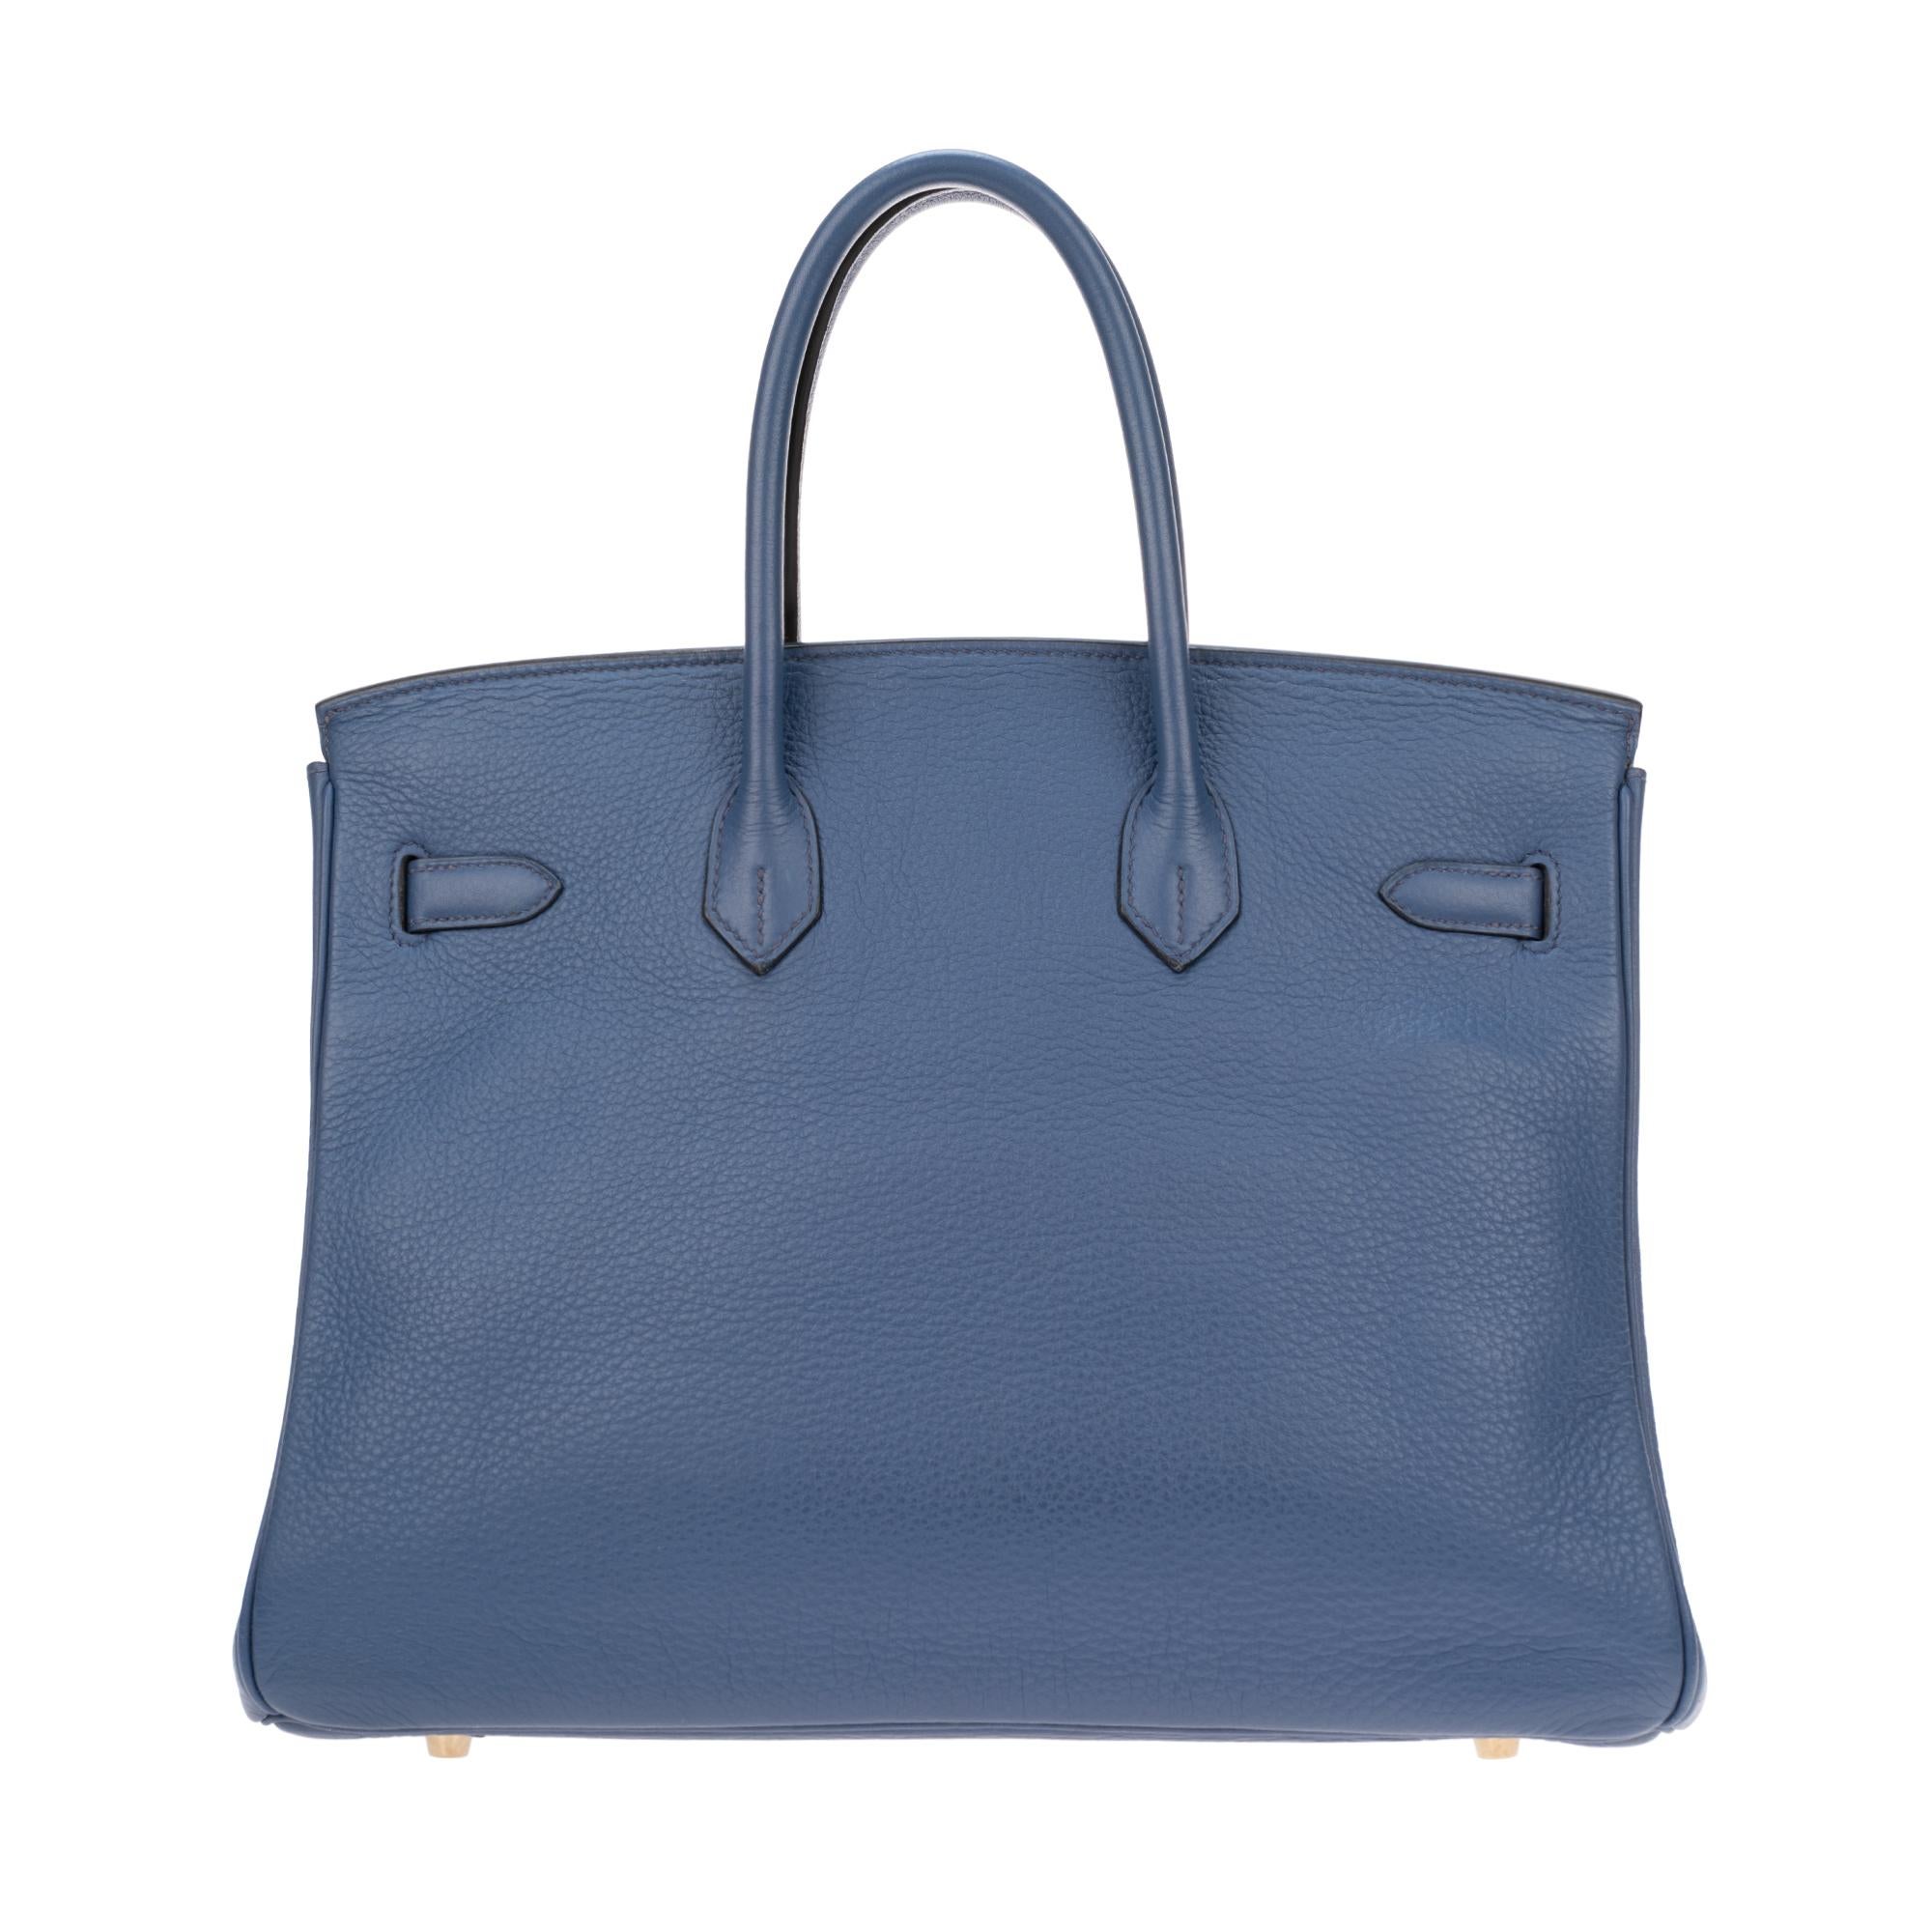 Brand: Hermes
Model: Birkin
Material: Togo Leather
Color: Bleu & Gold Hardware
Stamp: L (2008)
Measurement: 35X25X18 cm
Condition: Very good, despite some traces of use on the hardware and leather.
Packaging: Original dust bag & box

